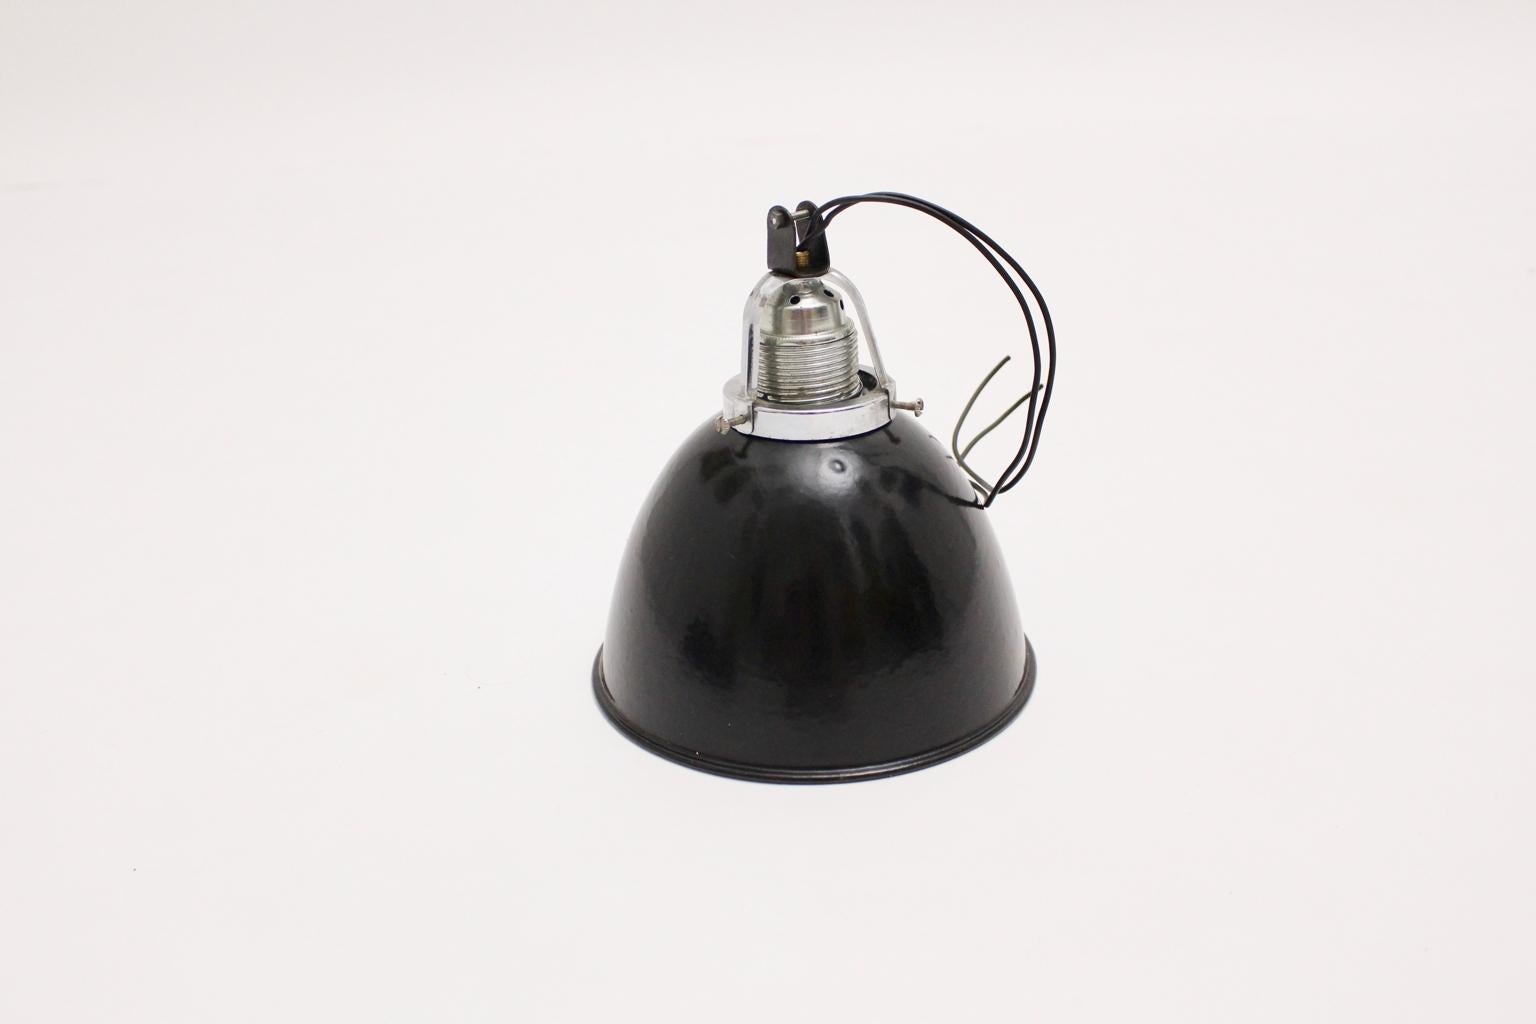 Bauhaus vintage hanging lamp from enameled  metal in black and white color 1920s, Germany.
A simple and sophisticated hanging lamp consists of enameled metal, chromed metal and a porcelain E 27 socket.

Very good condition with signs of age.
approx.